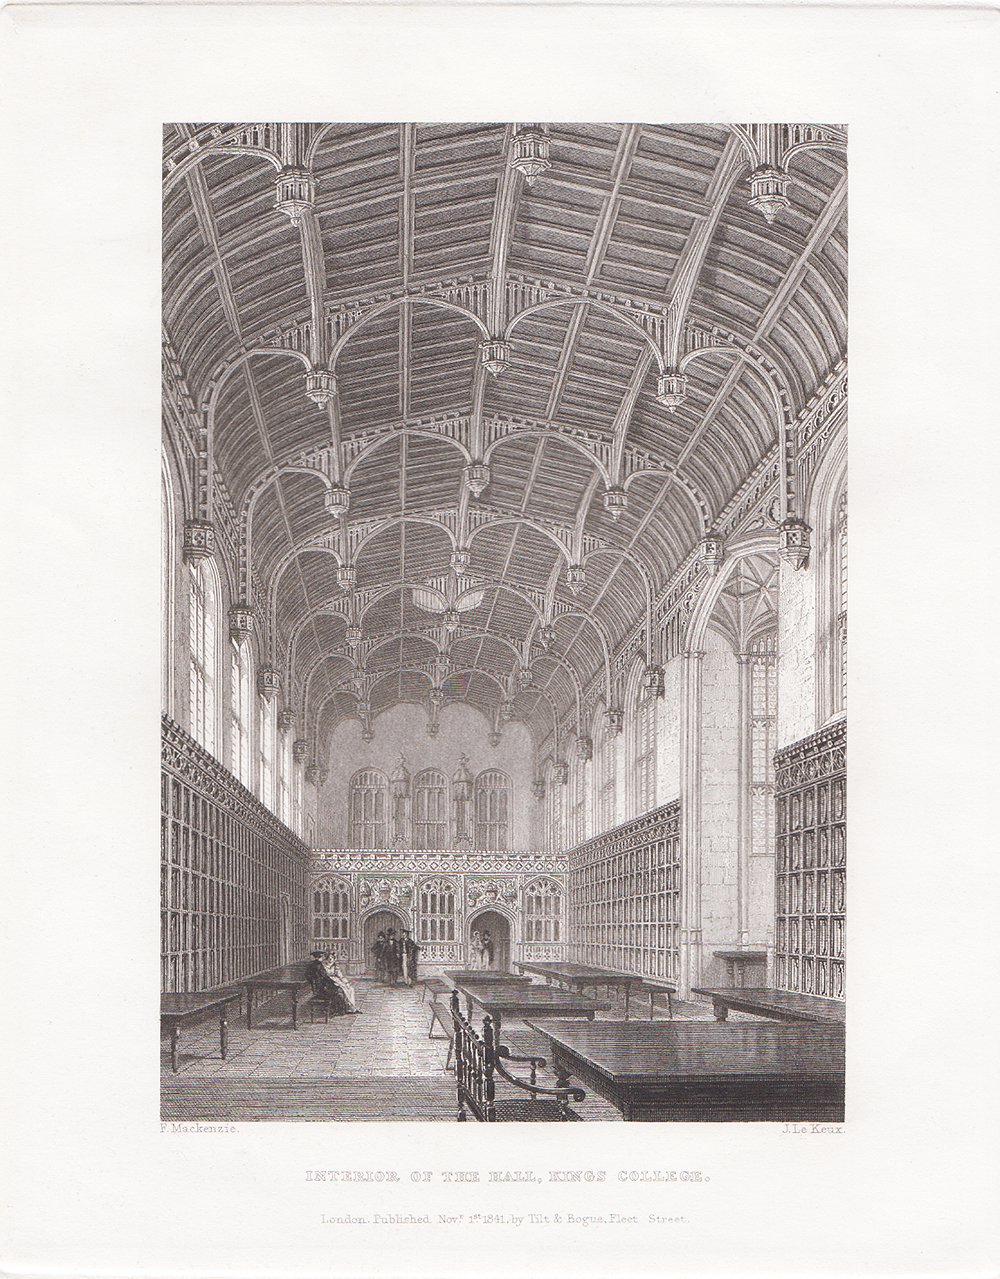 Interior of the Hall Kings College